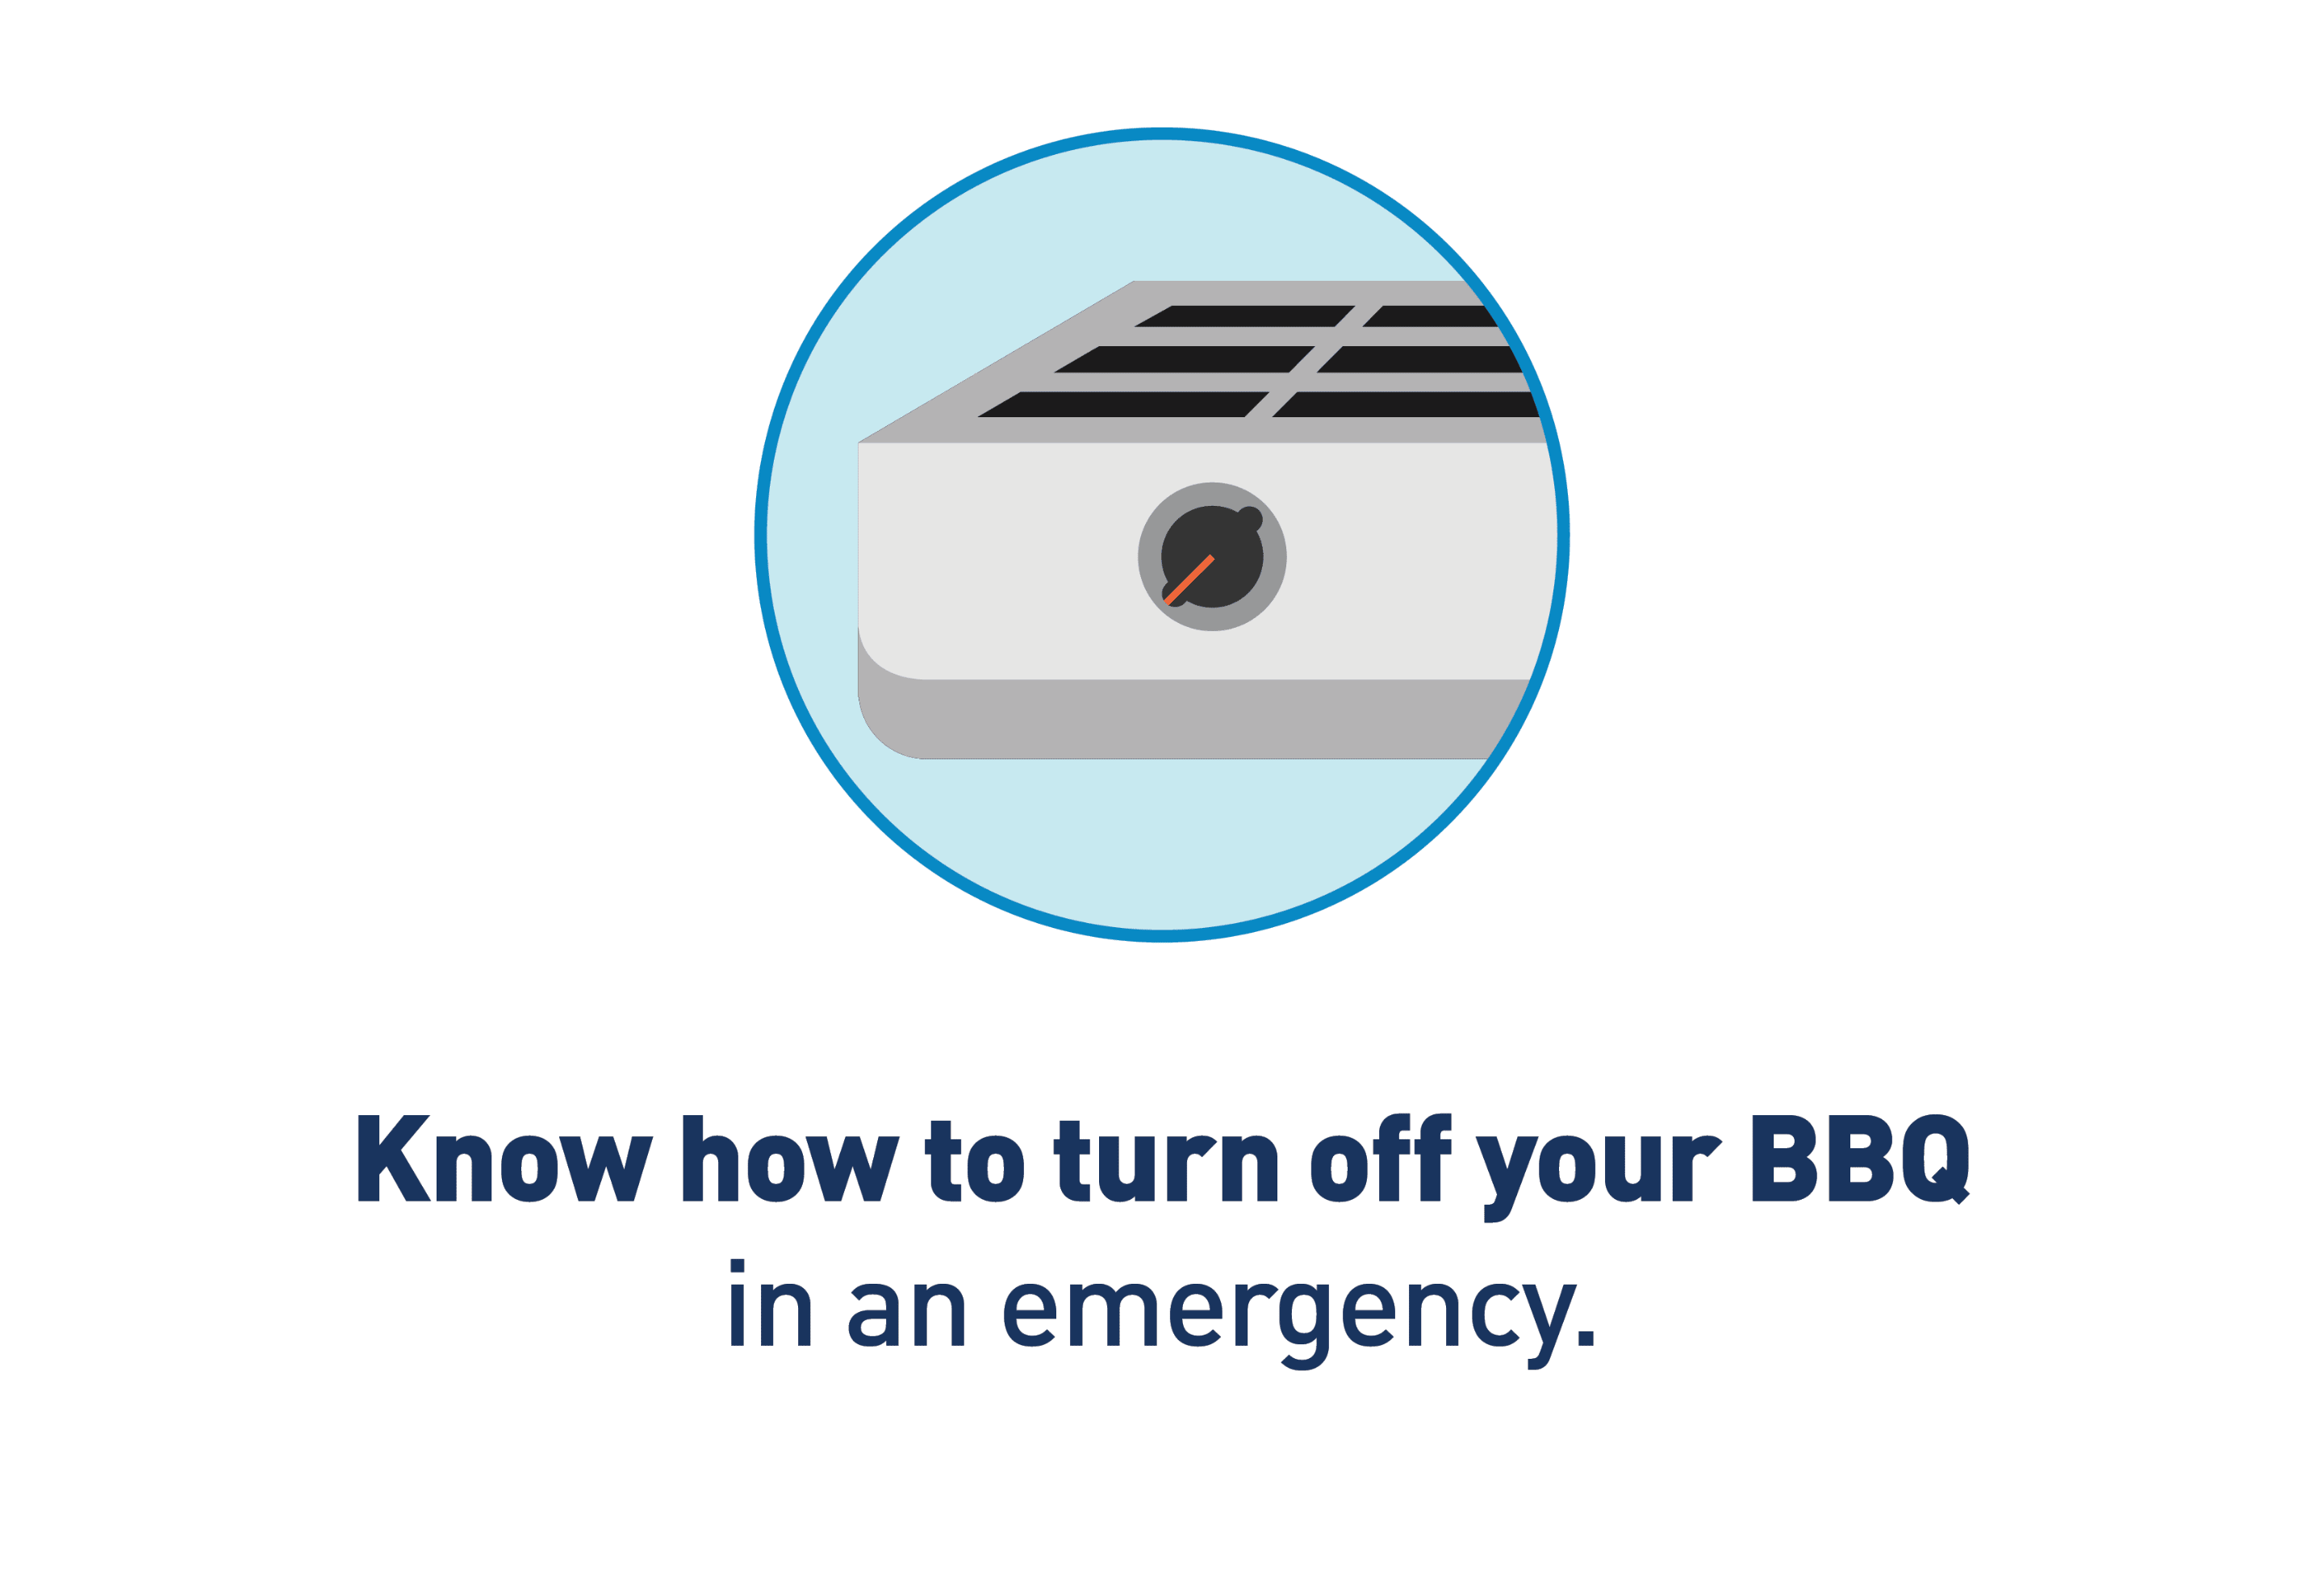 Image Description: Graphic of barbecue on/off switch. Text: Know how to turn off your BBQ in an emergency.